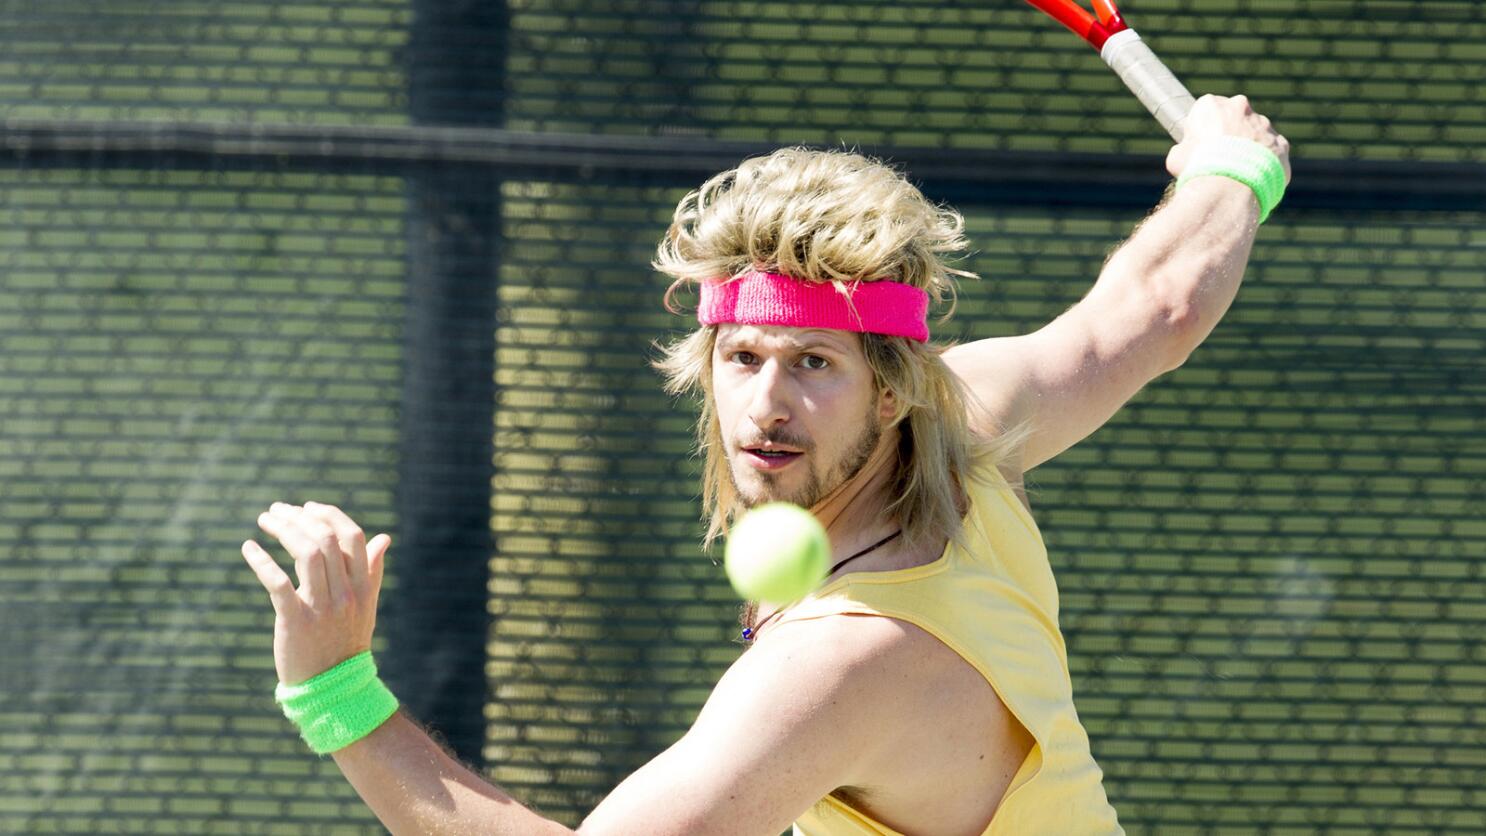 Andy Samberg stars in fictional sports documentary 7 Days In Hell on HBO  July 11